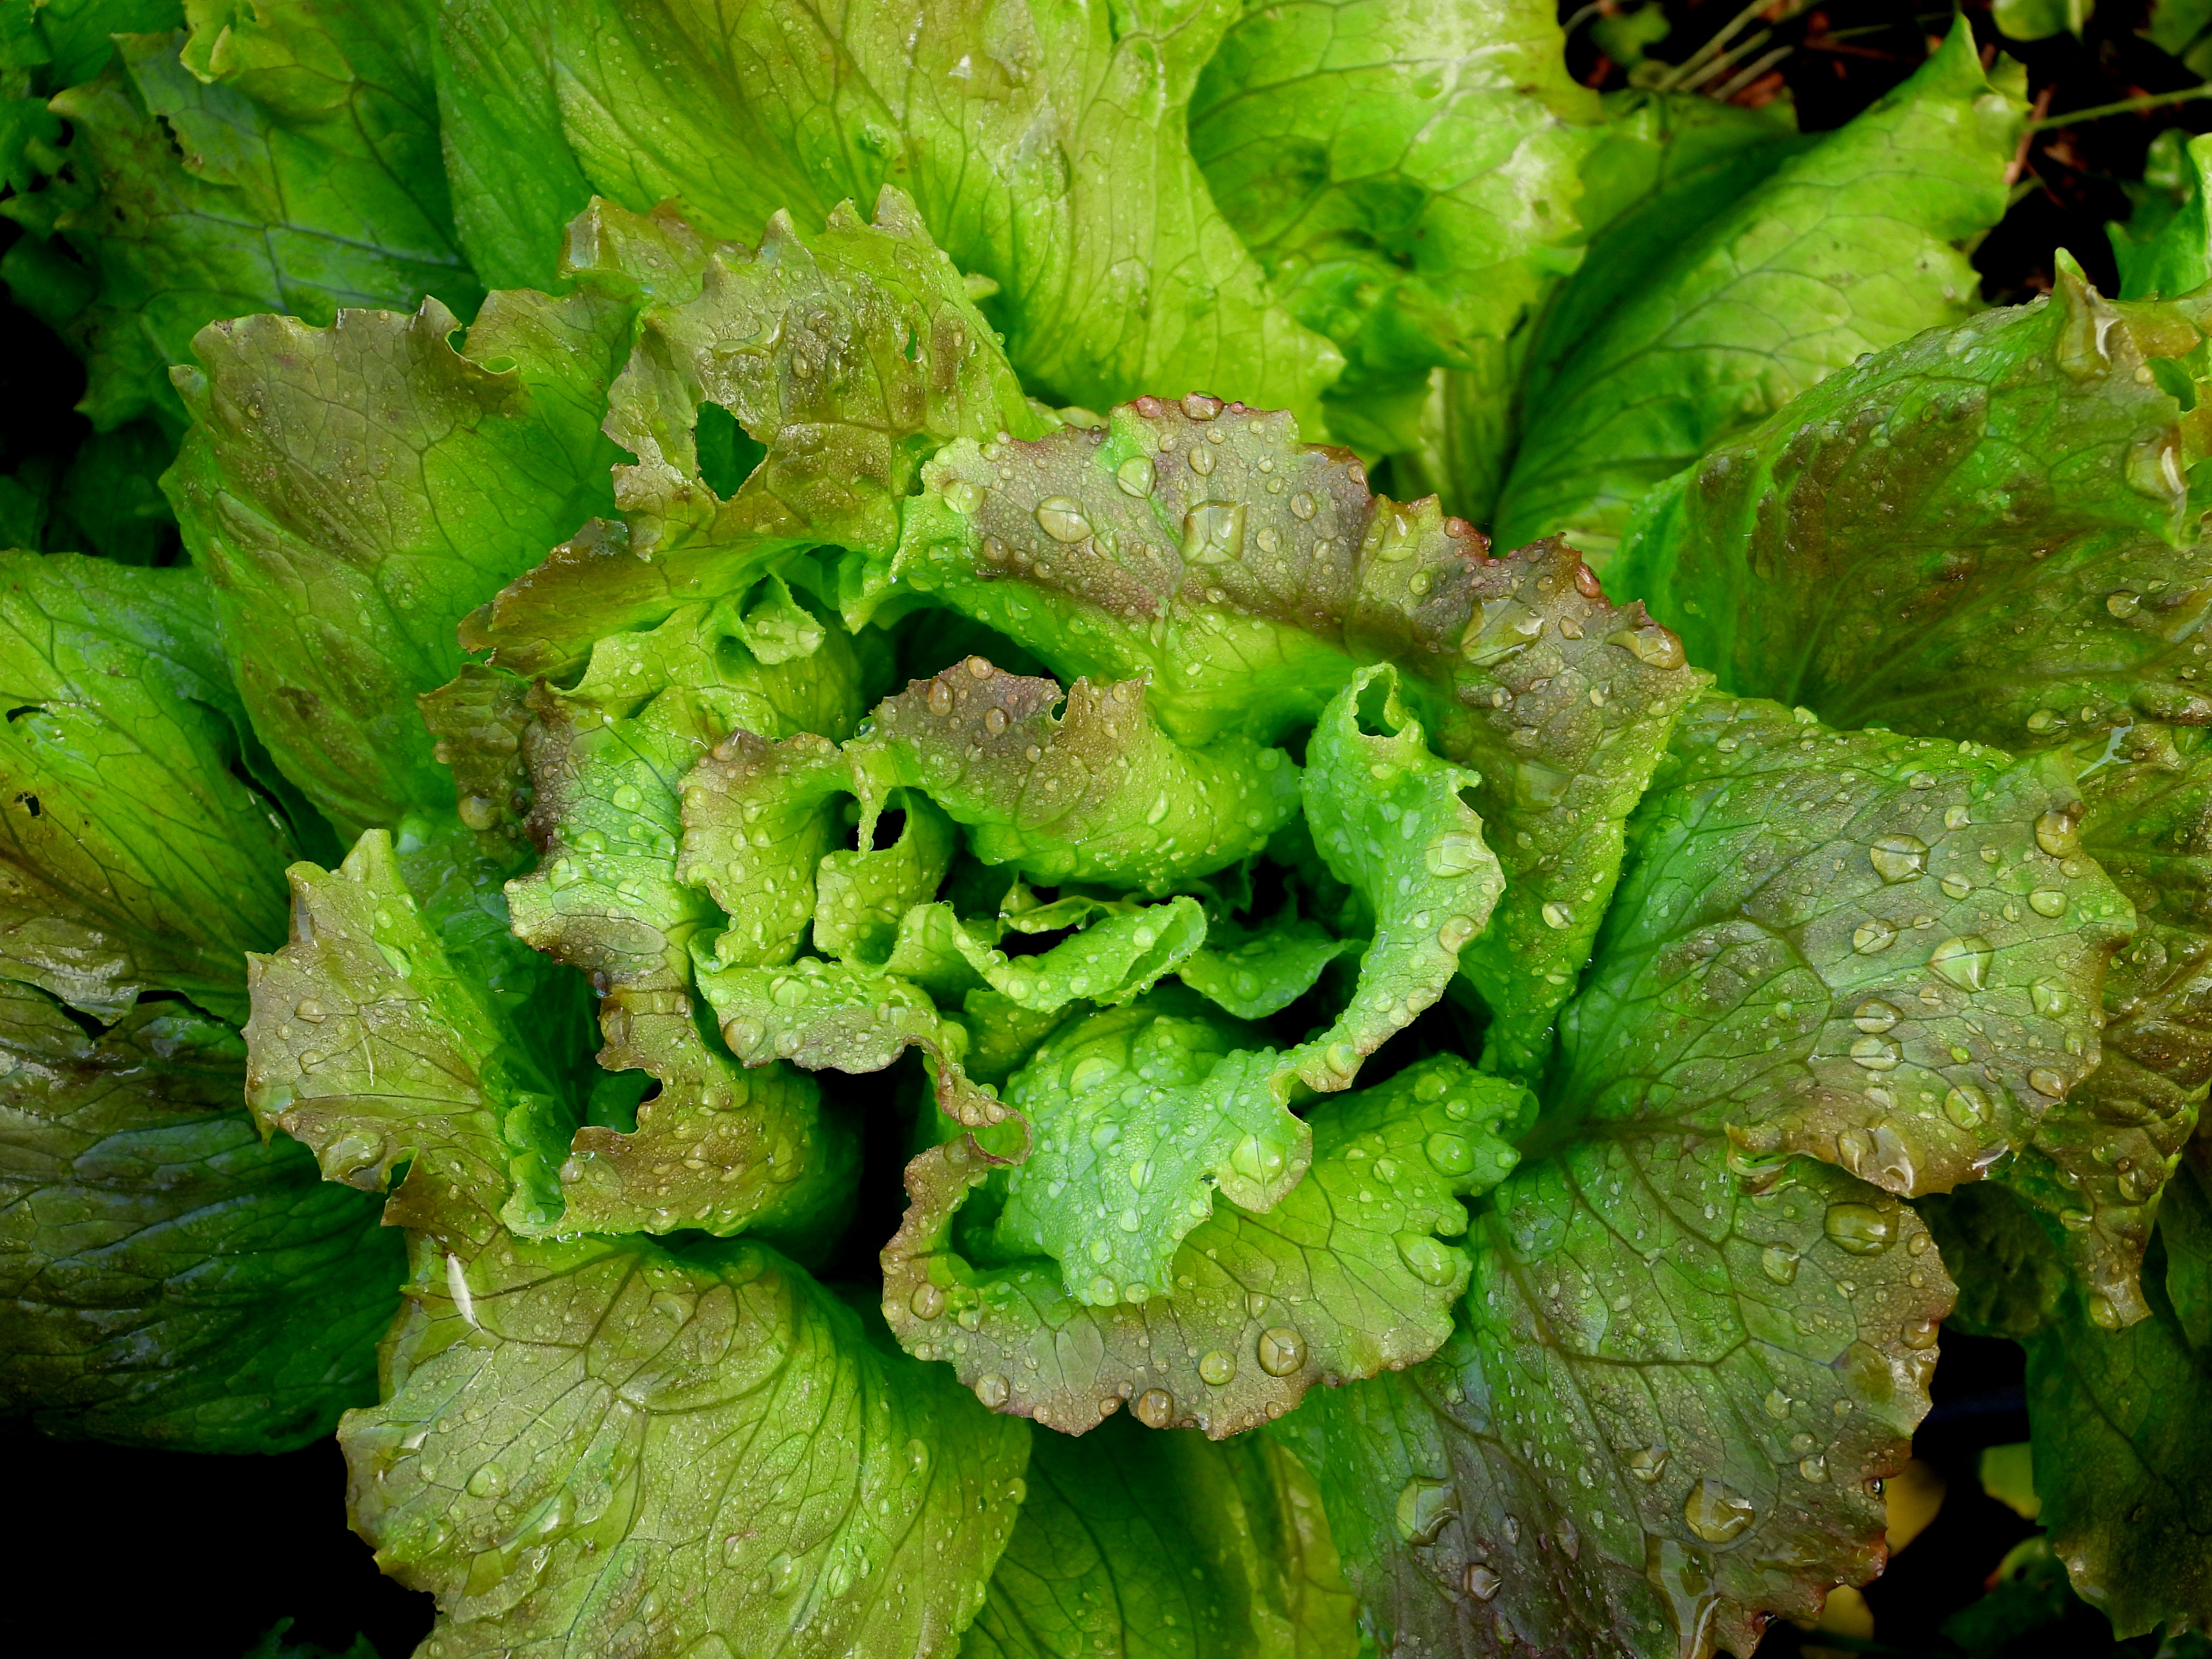 A close up view of the center of a head of lettuce sprayed with water droplets.